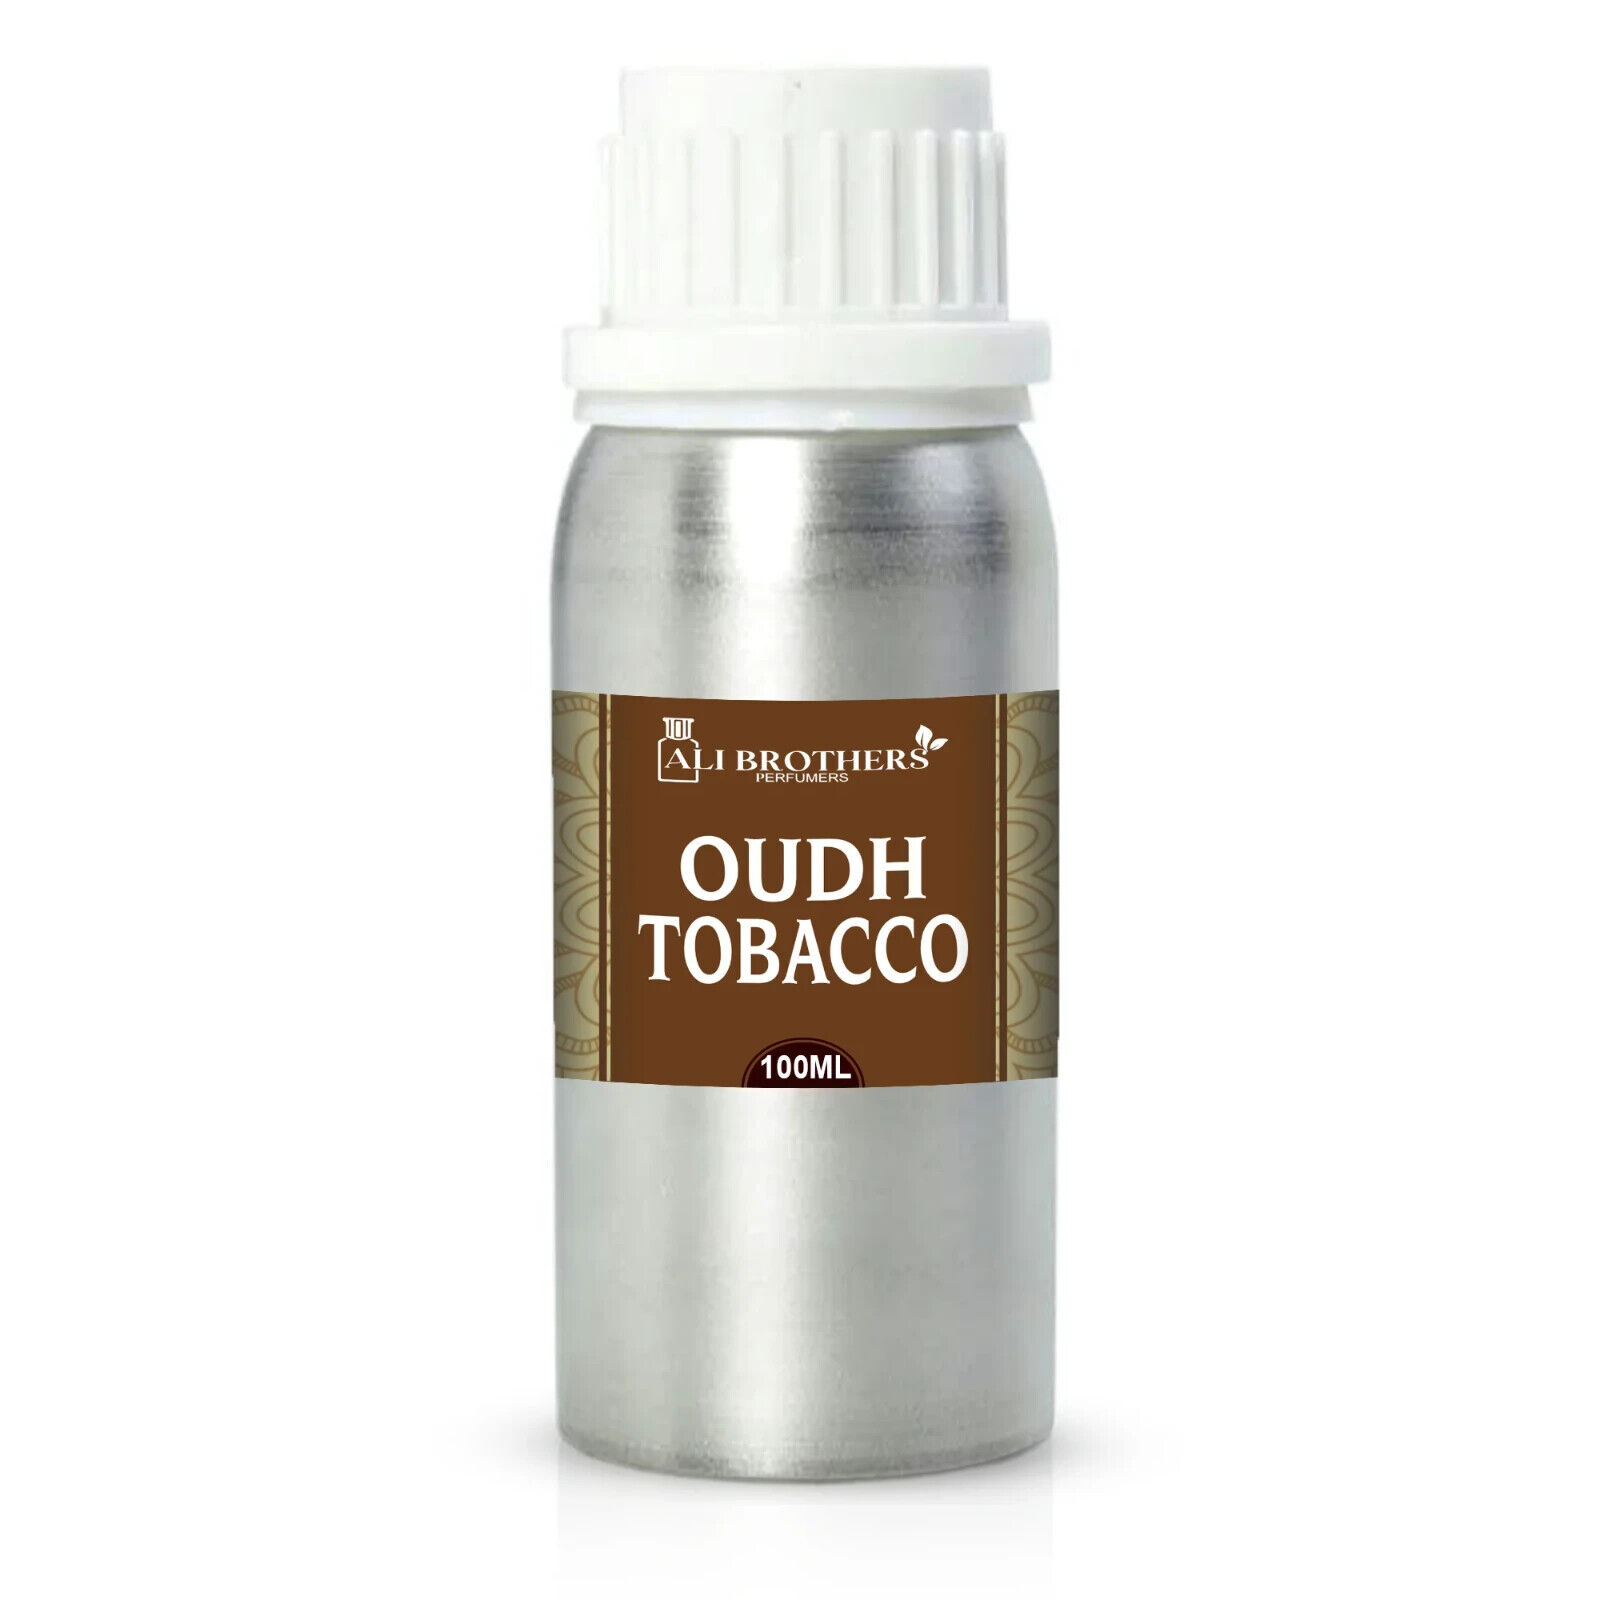 OUD TOBACCO by Ali Brothers Perfumes oil | 100 ml packed | Attar oil